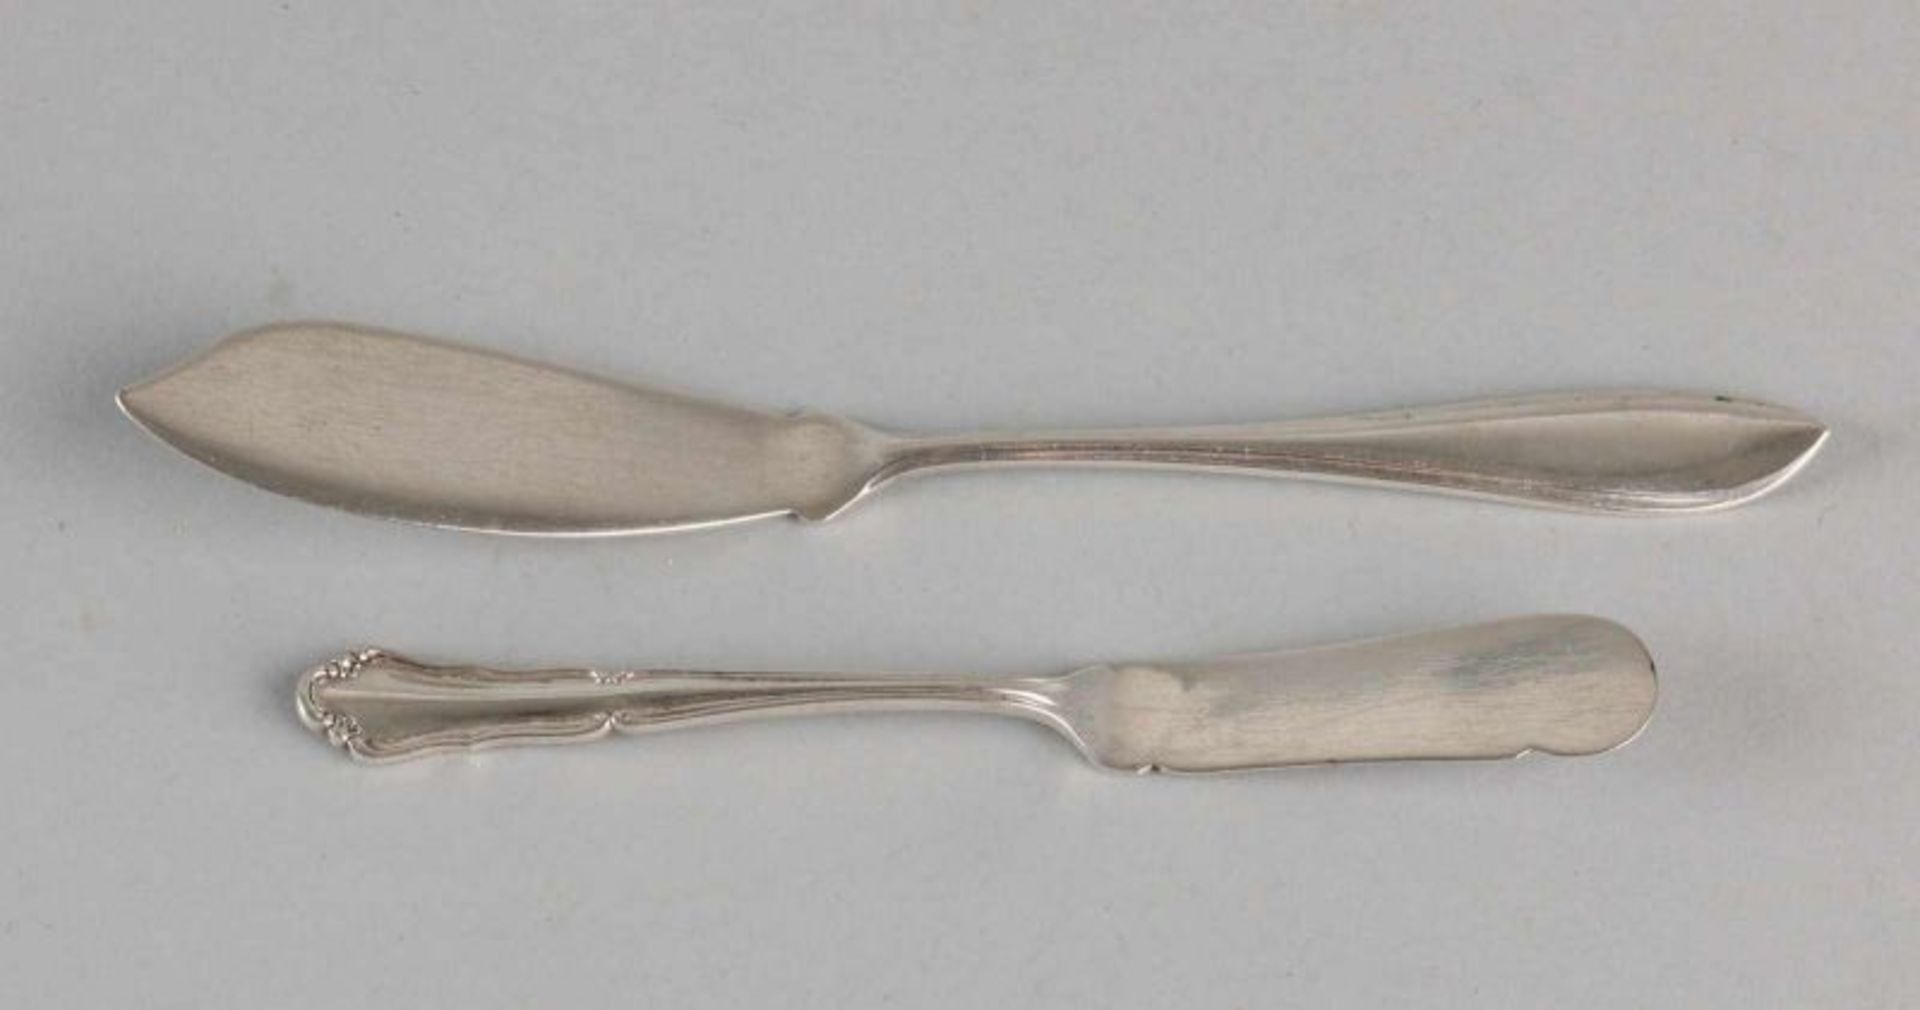 835/000 Silver kruidenbotermes (ca. 14 grams) with two-sided carved stem and Dutch hallmark. And